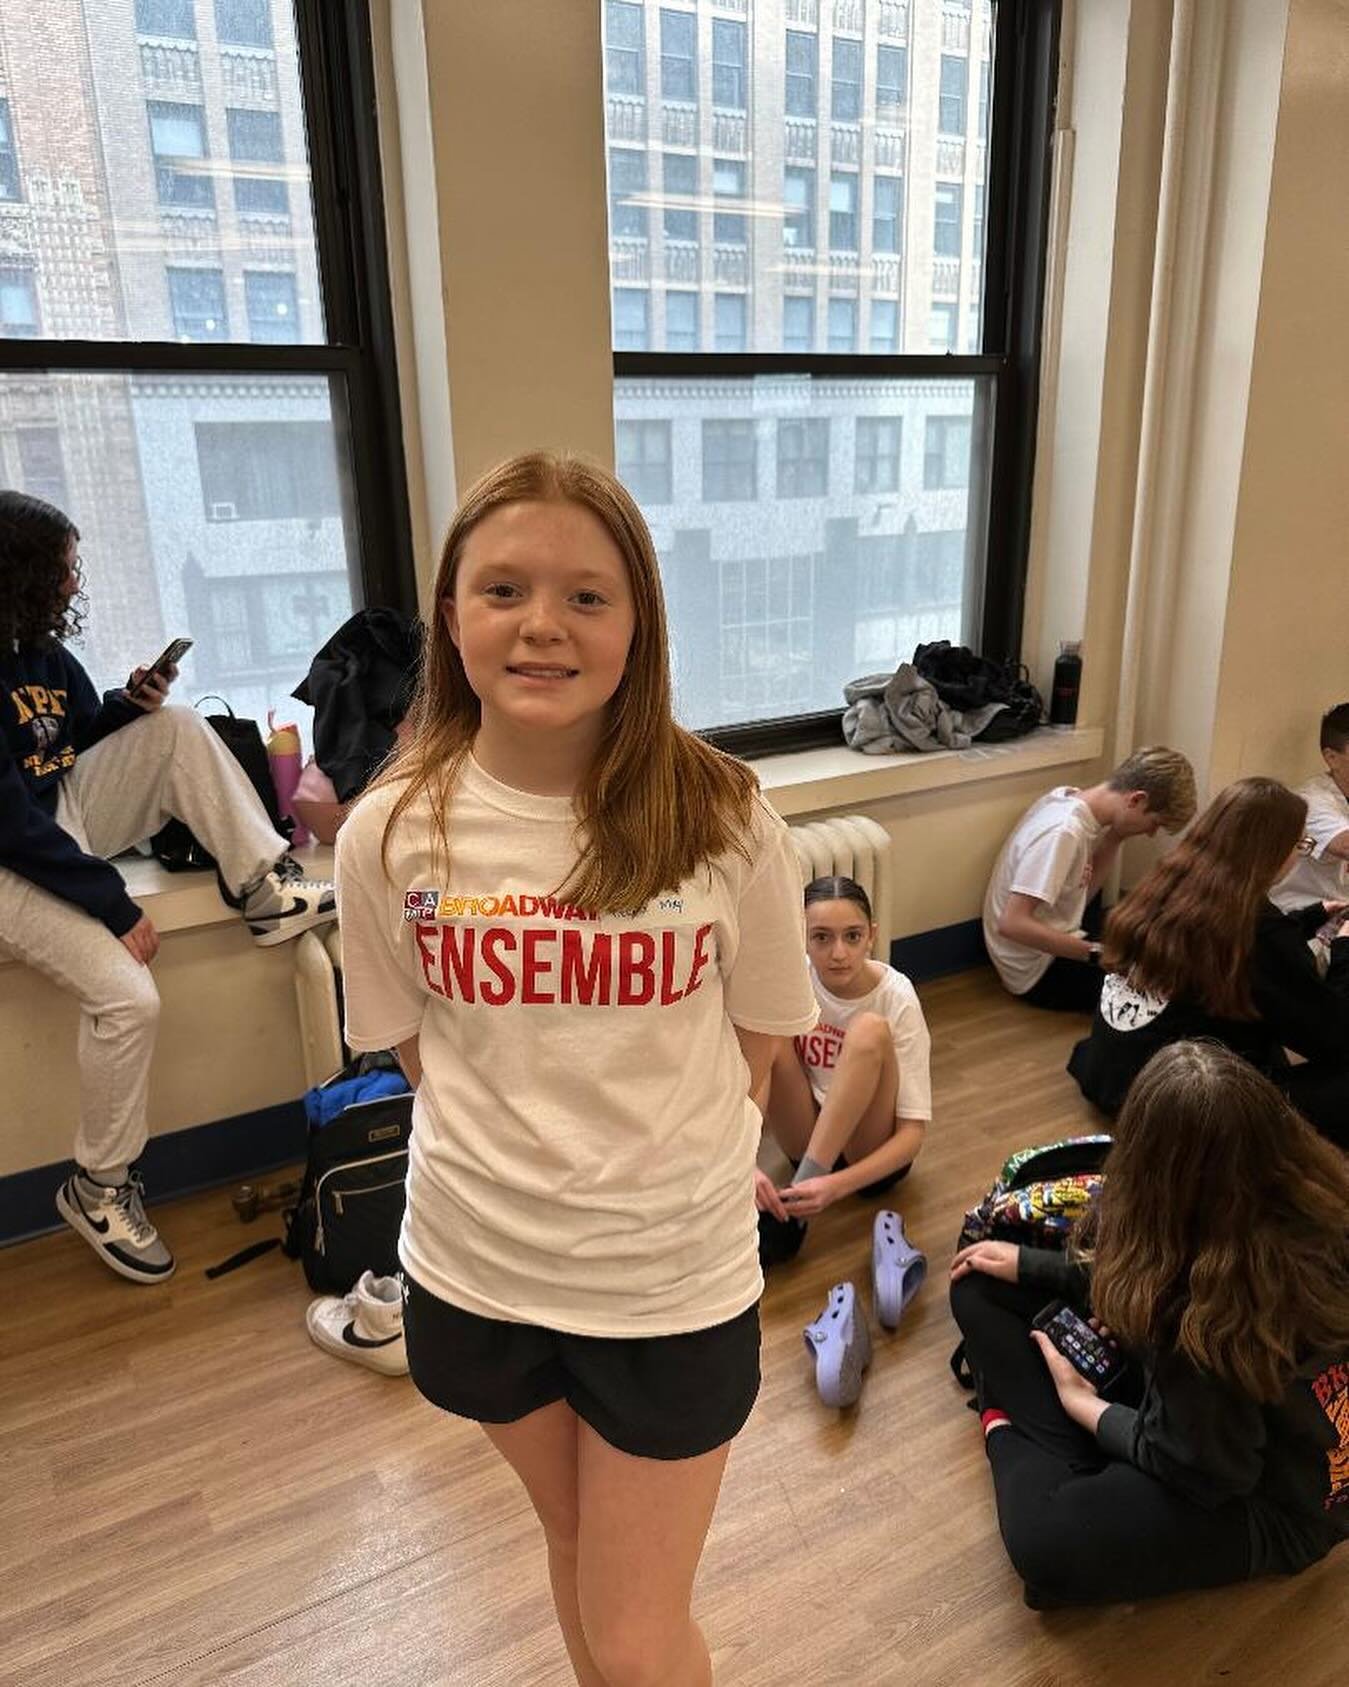 Congrats to TMC dancer Cecelia who was a featured dancer at Carnegie Hall with Camp Broadway Ensemble⭐️